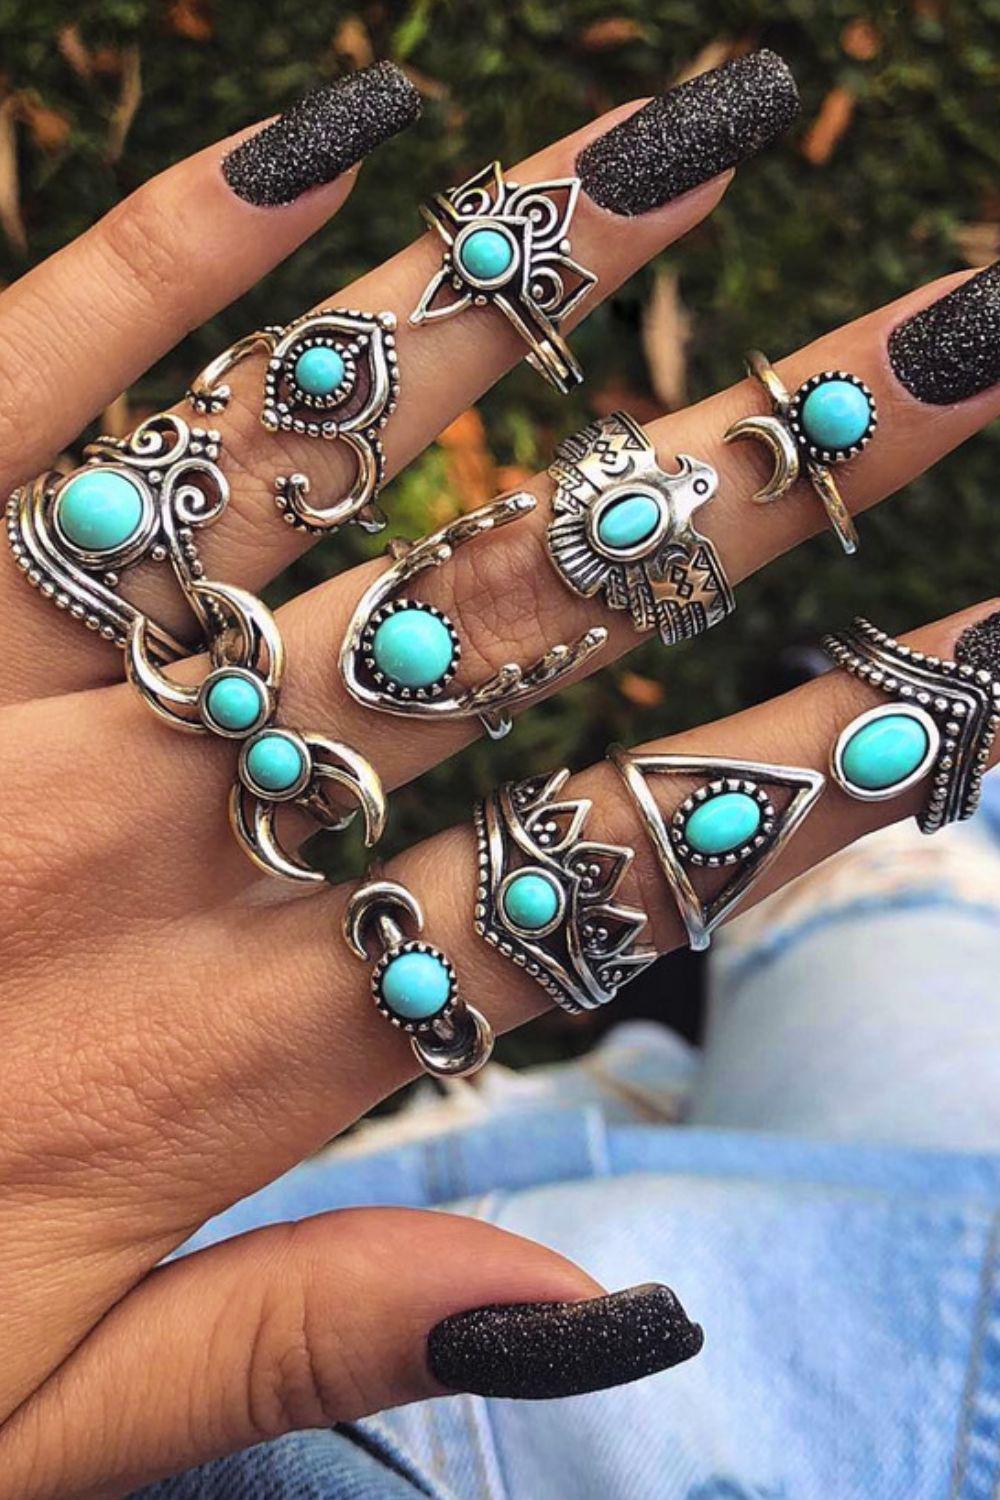 11-Piece Vintage Inlaid Artificial Turquoise Ring Set BLUE ZONE PLANET